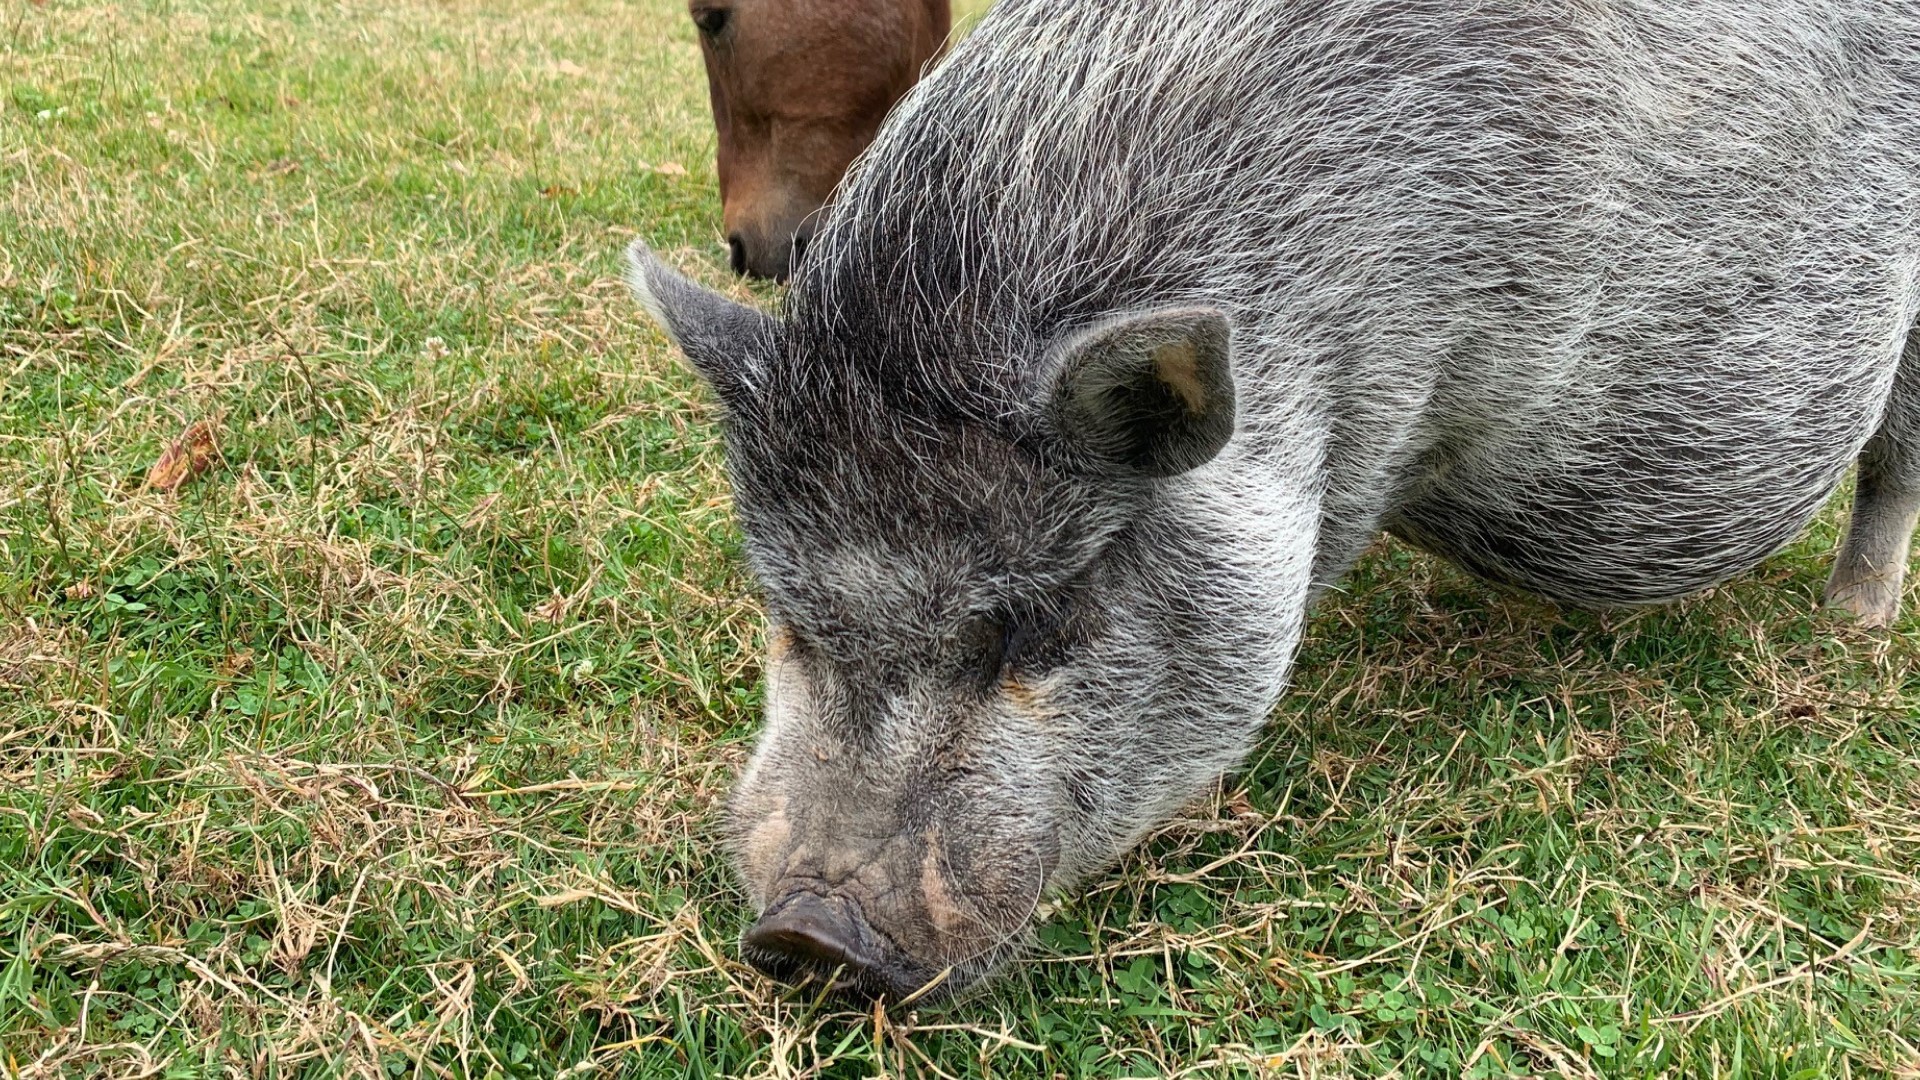 Pebble Cove Farm is a waterfront inn that invites guests to get friendly with animals and explore their organic garden.